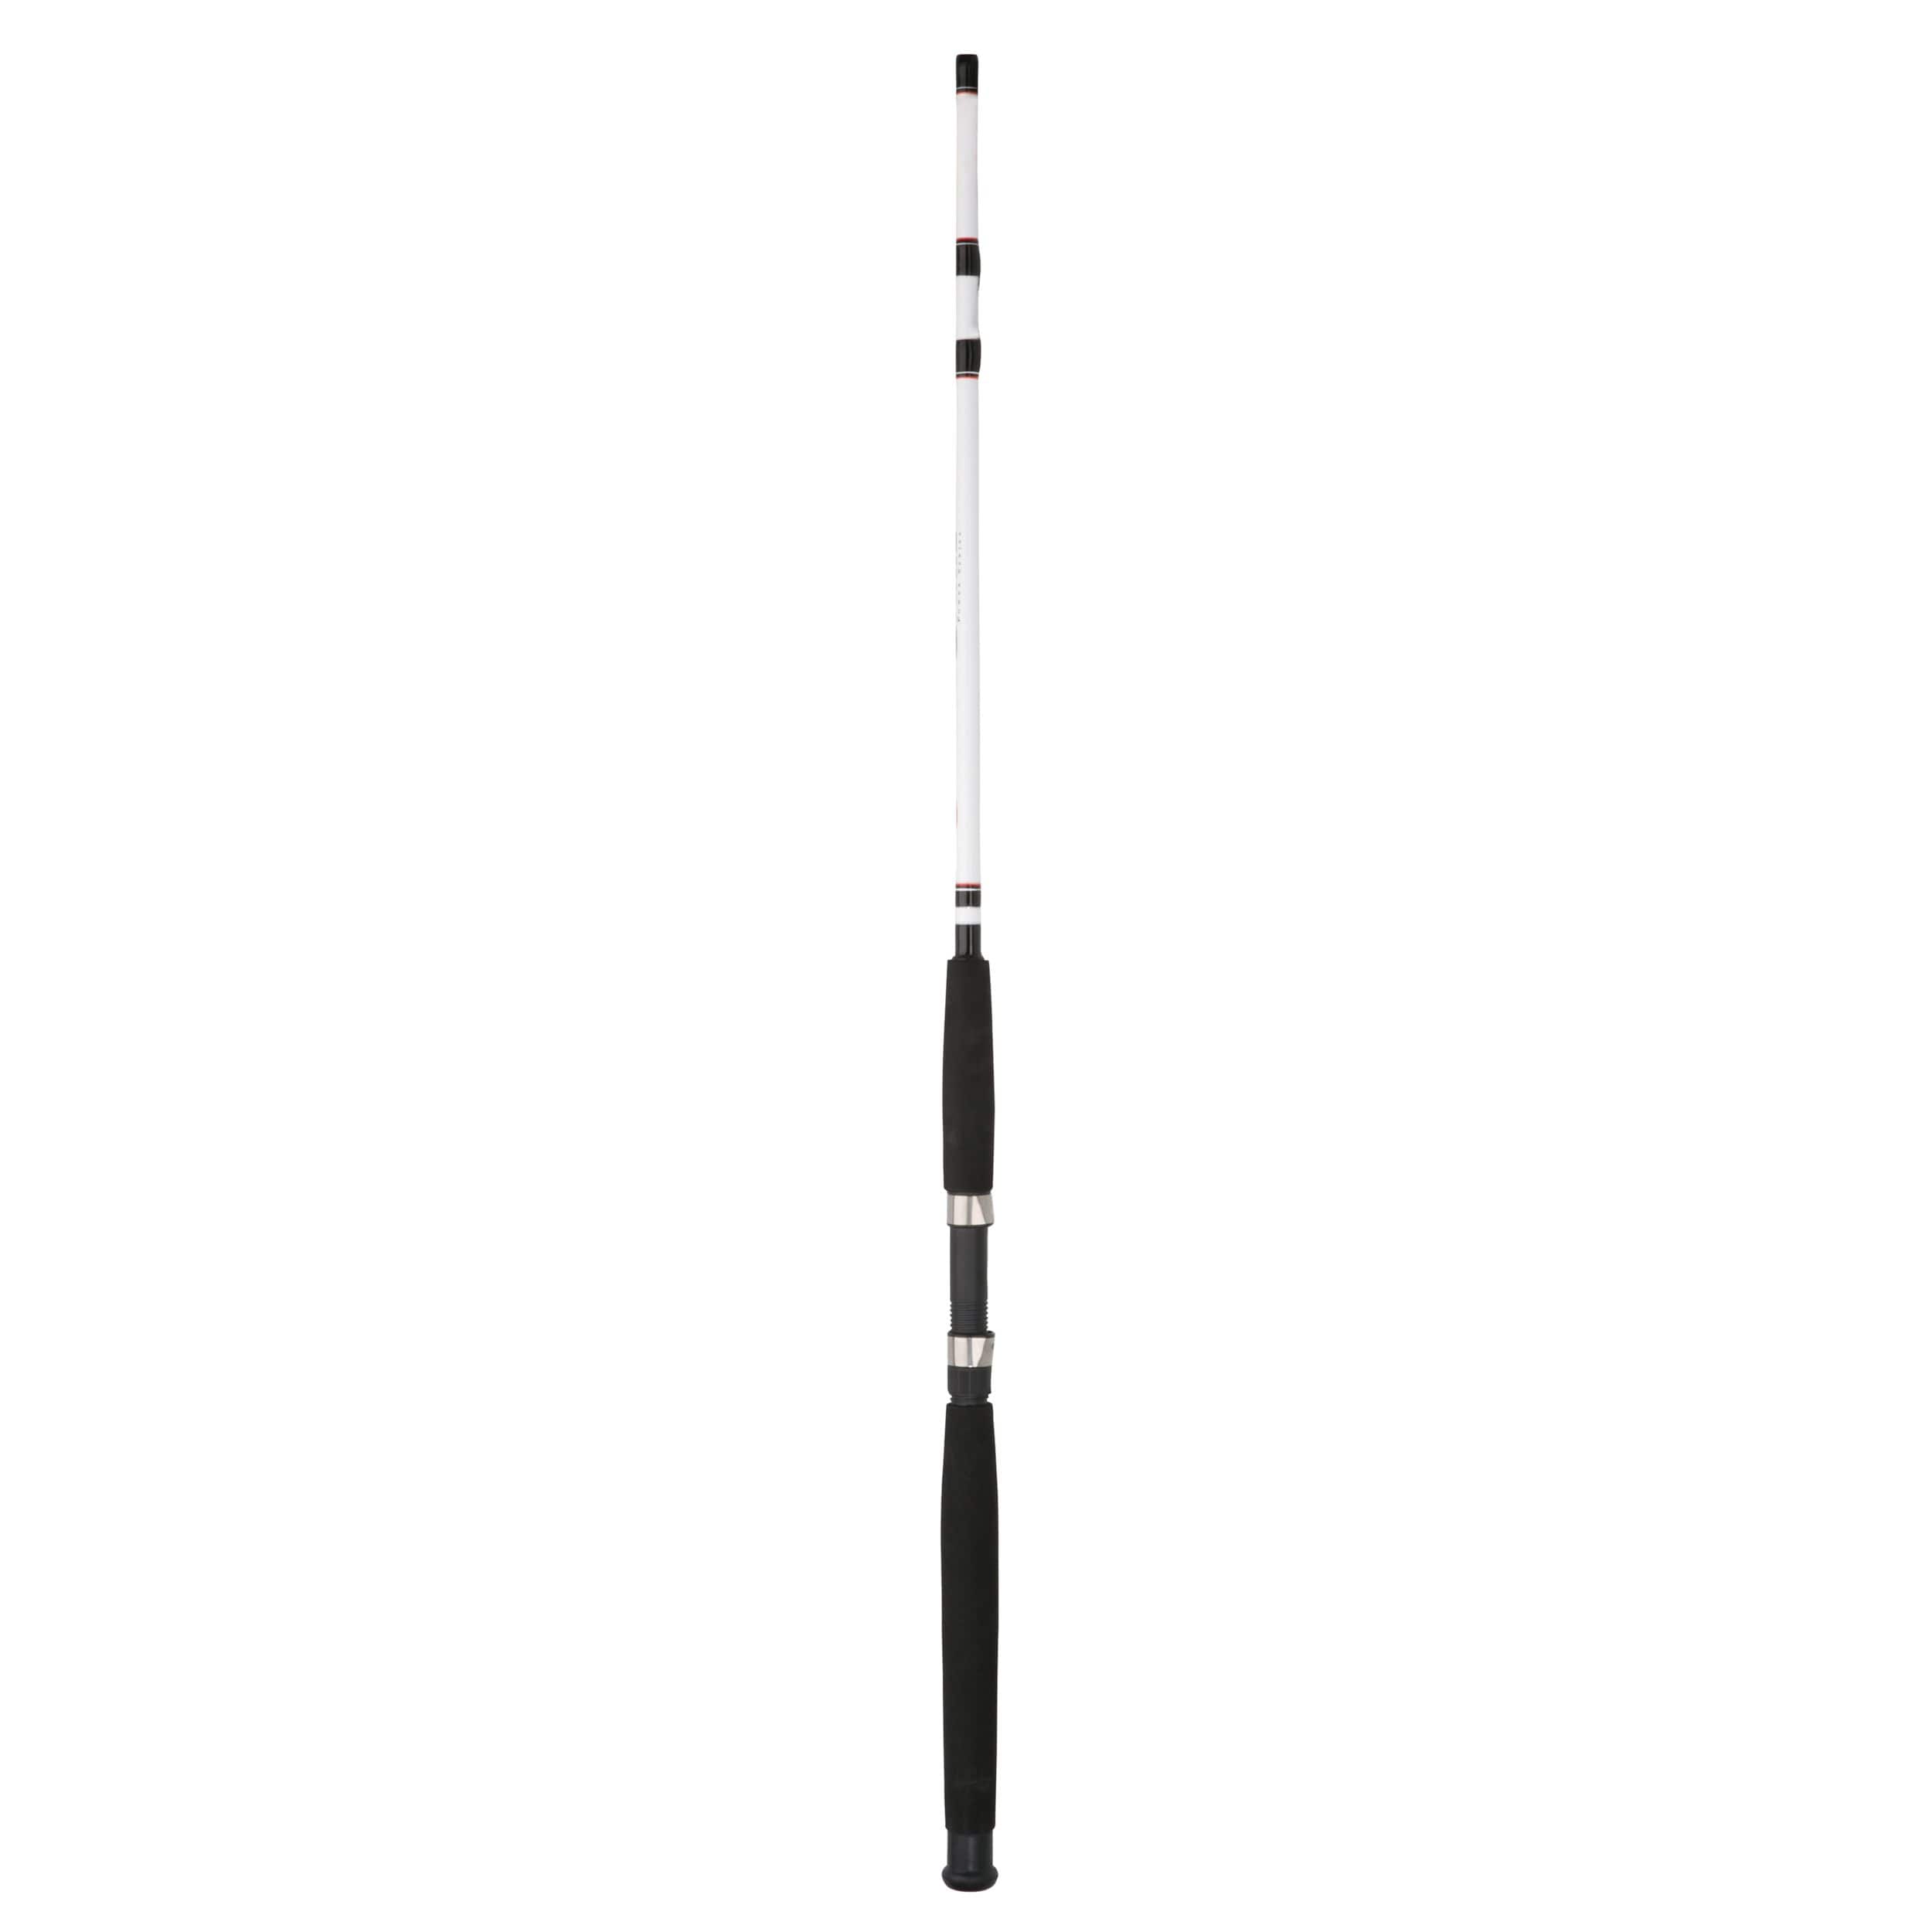 Berkley Big Game Spinning Fishing Rod and Reel Combo, Pre-Spooled, Medium- Heavy, 8-ft, 2-pc